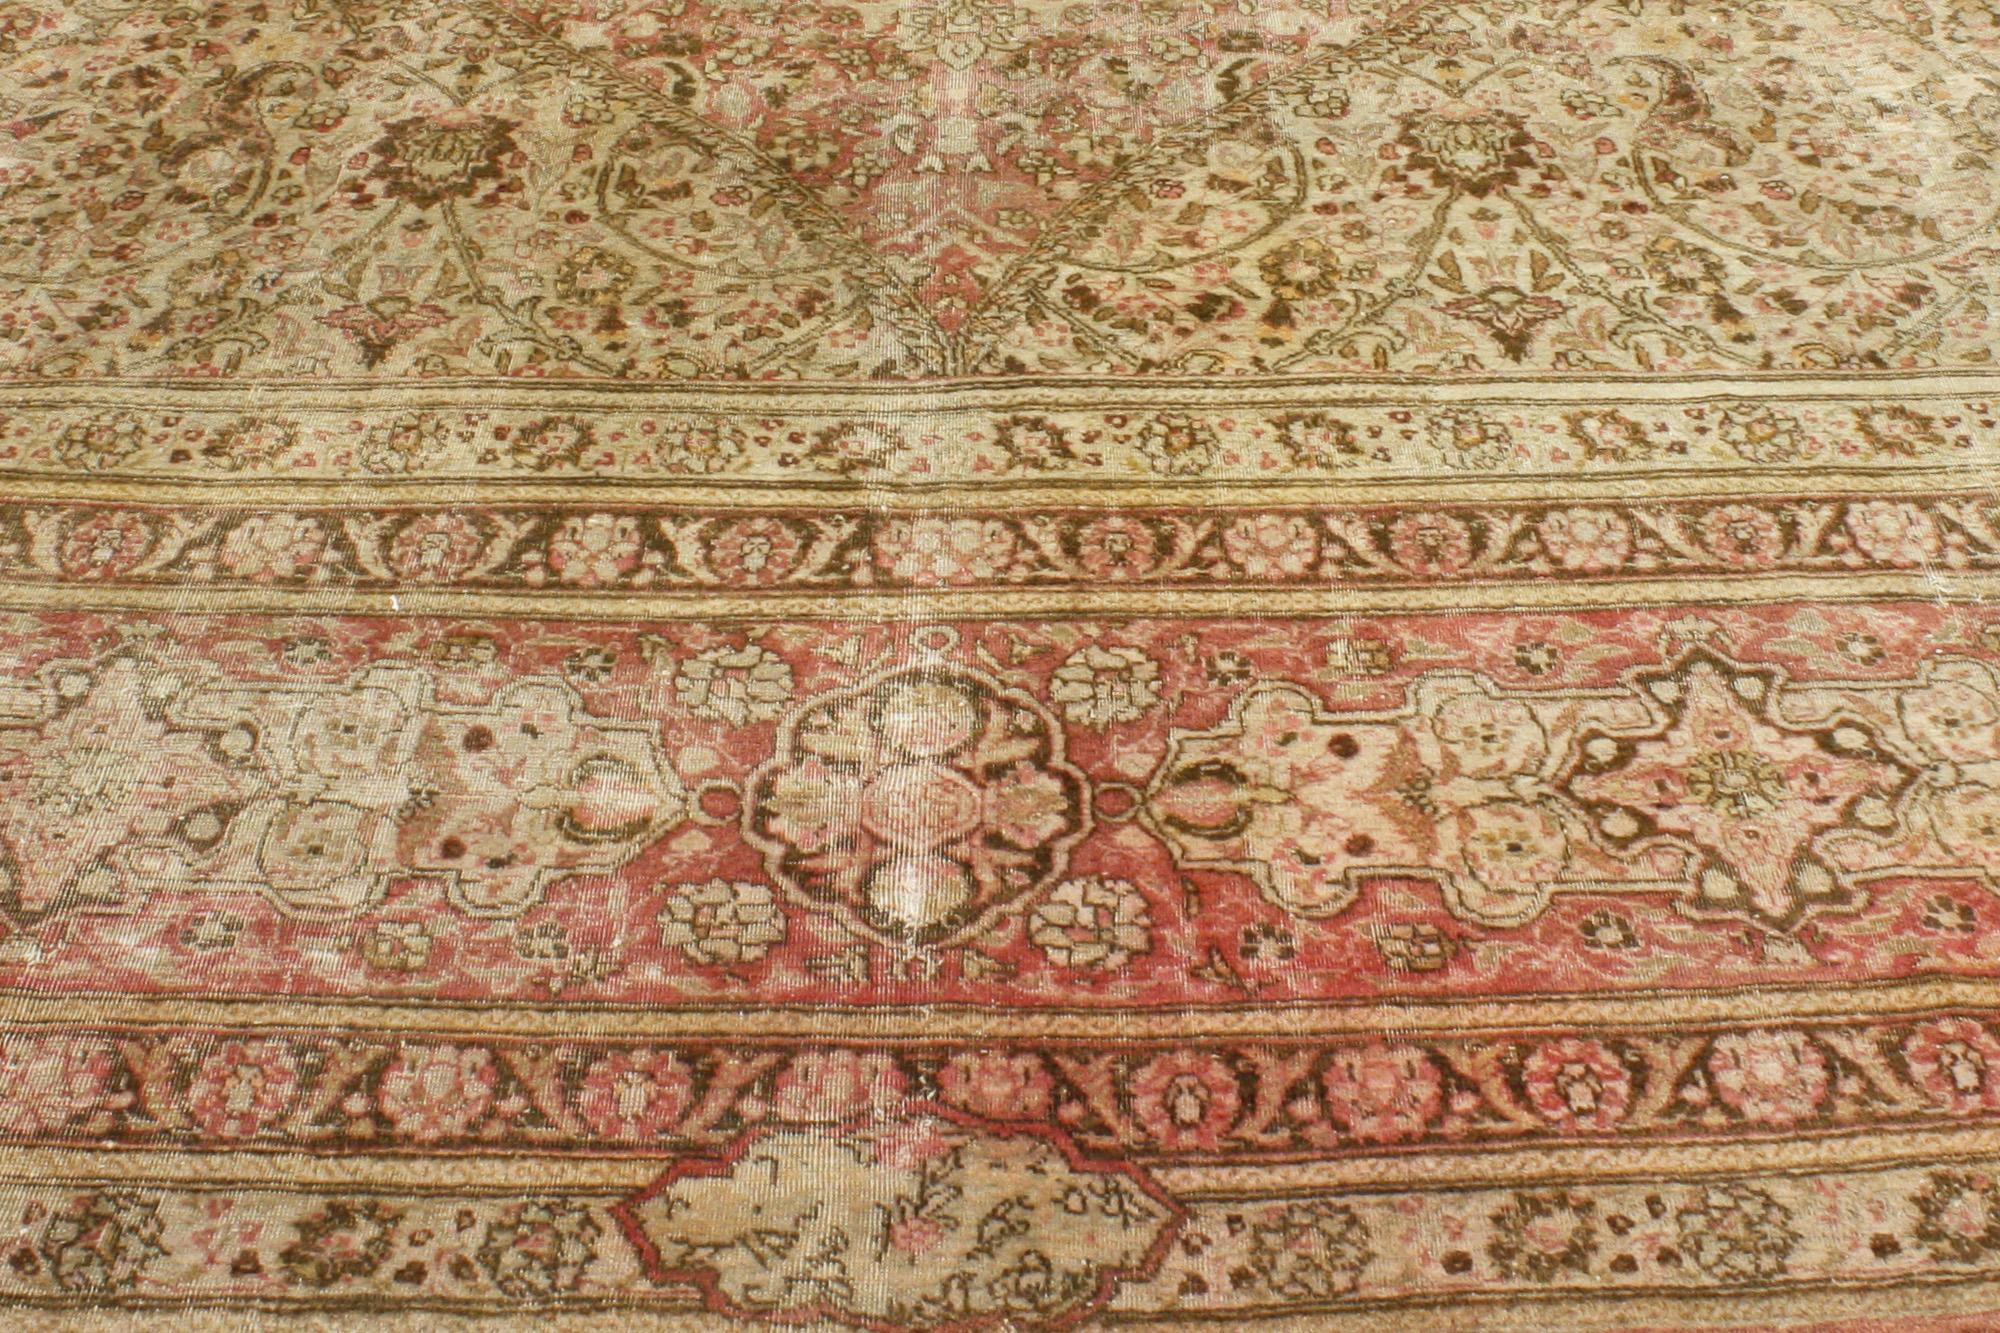 19th Century 1880s Oversized Antique Persian Tabriz Rug Hotel Lobby Size Carpet For Sale